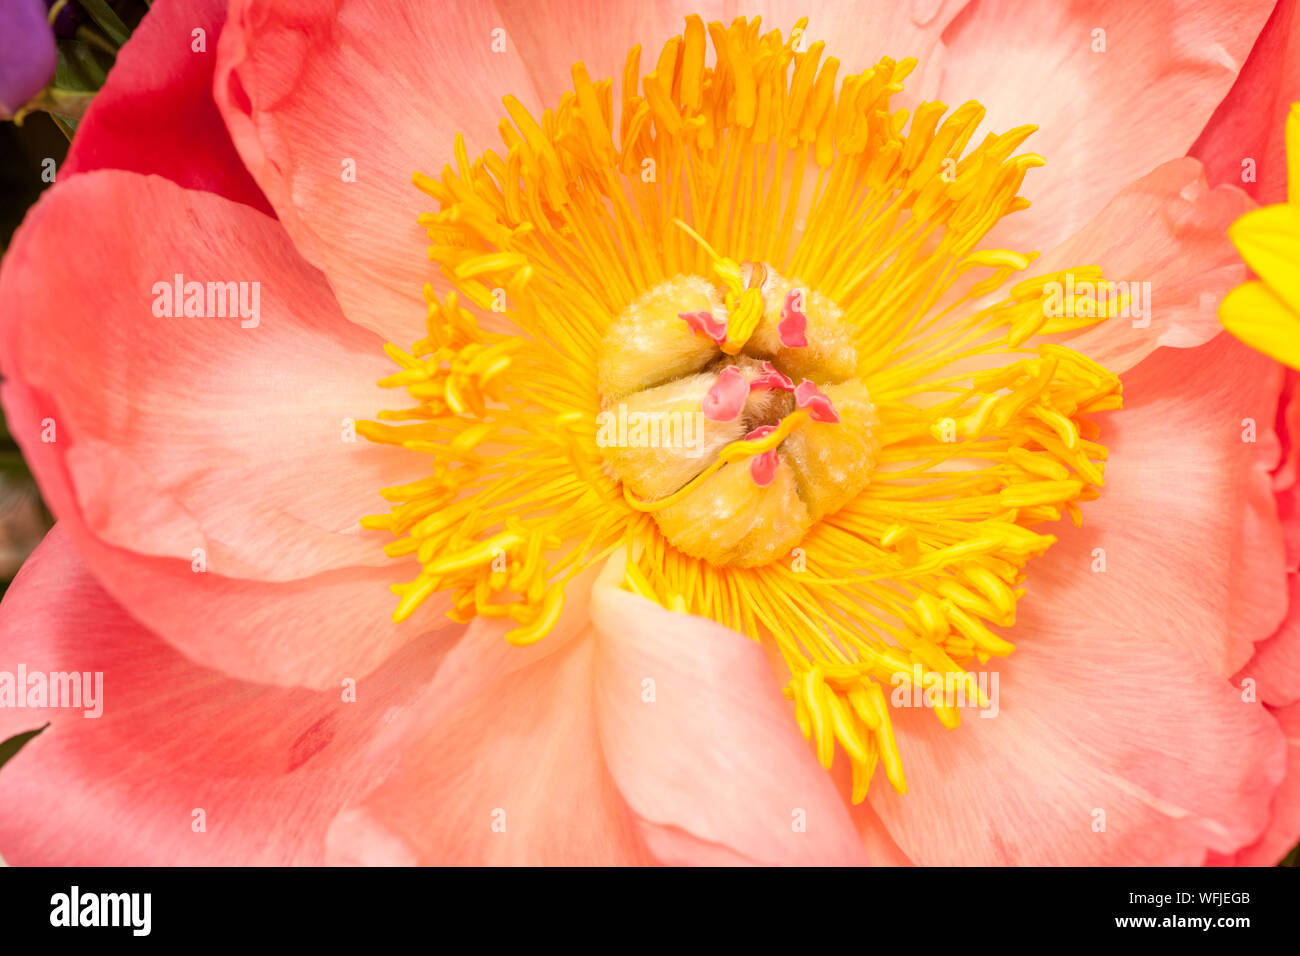 Closeup of the inside part of a pink peony with yellow stamps. Stock Photo